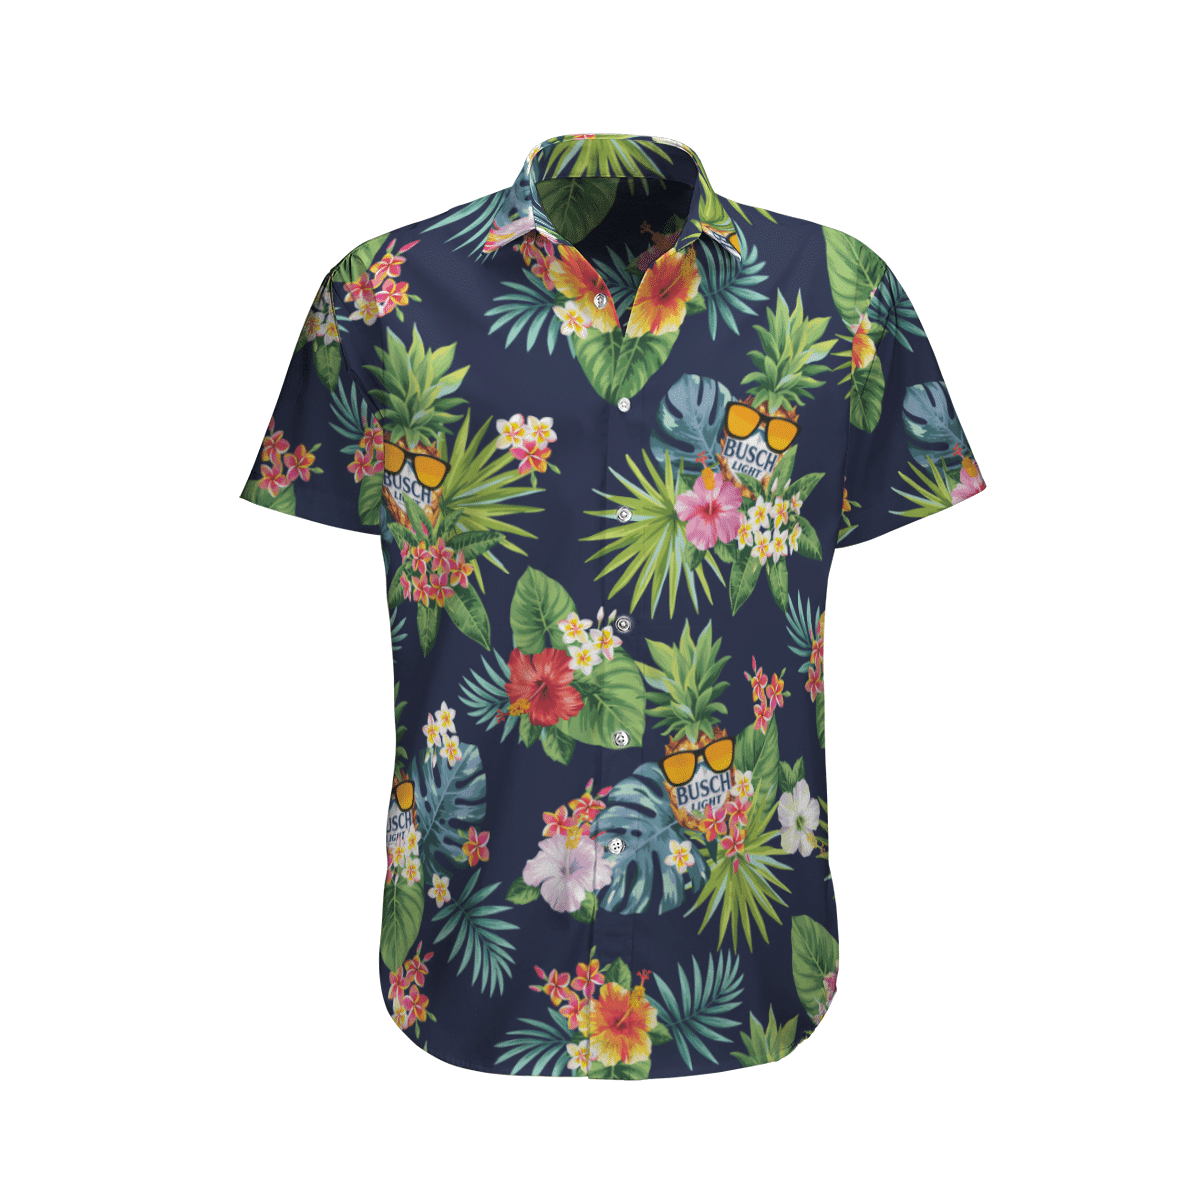 Top cool Hawaiian shirt 2022 - Make sure you get yours today before they run out! 10